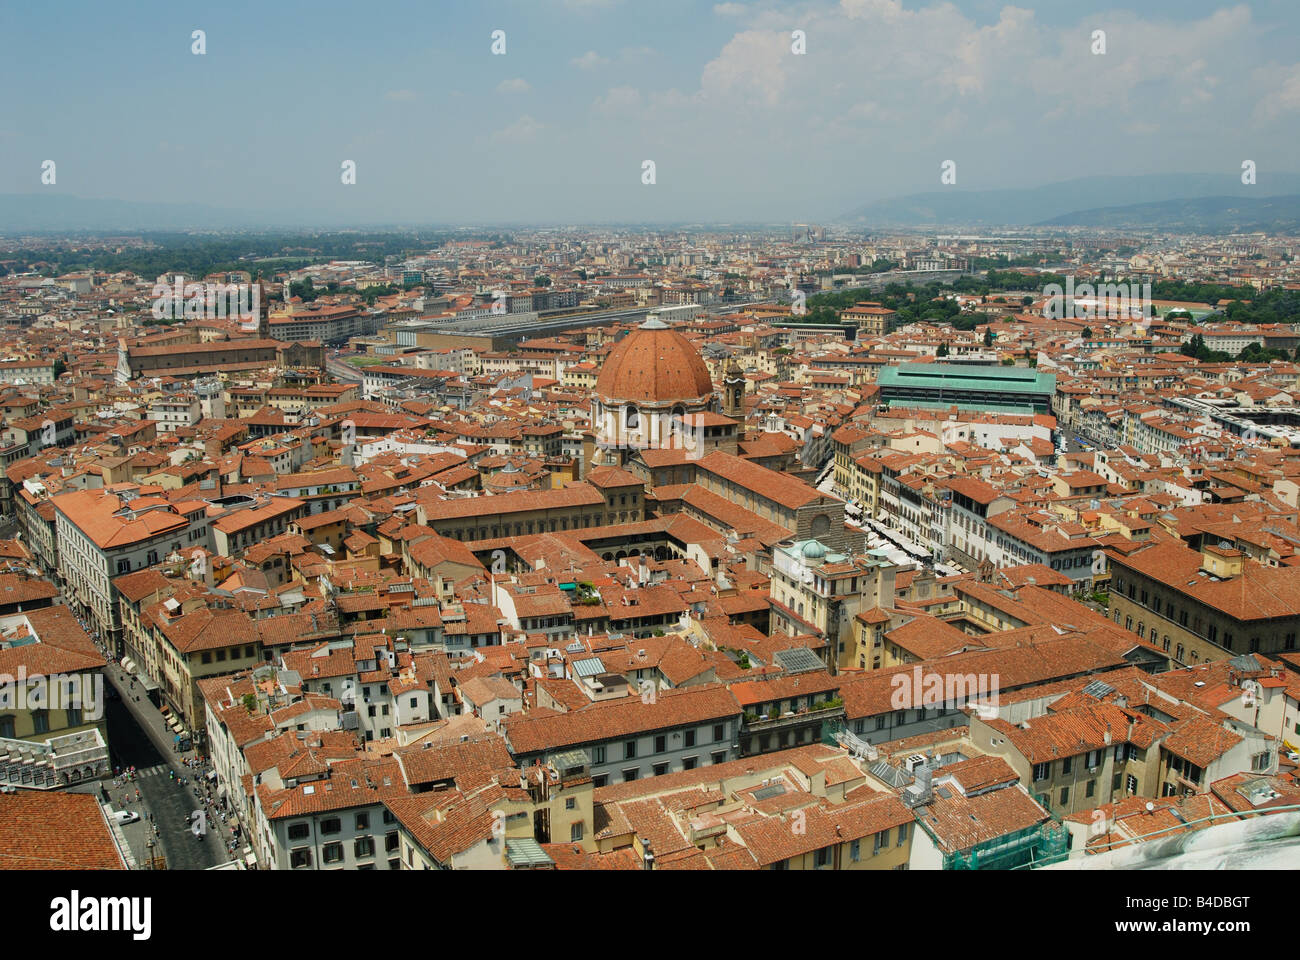 The view from the dome of Il Duomo over the historic city centre of Florence, Italy Stock Photo